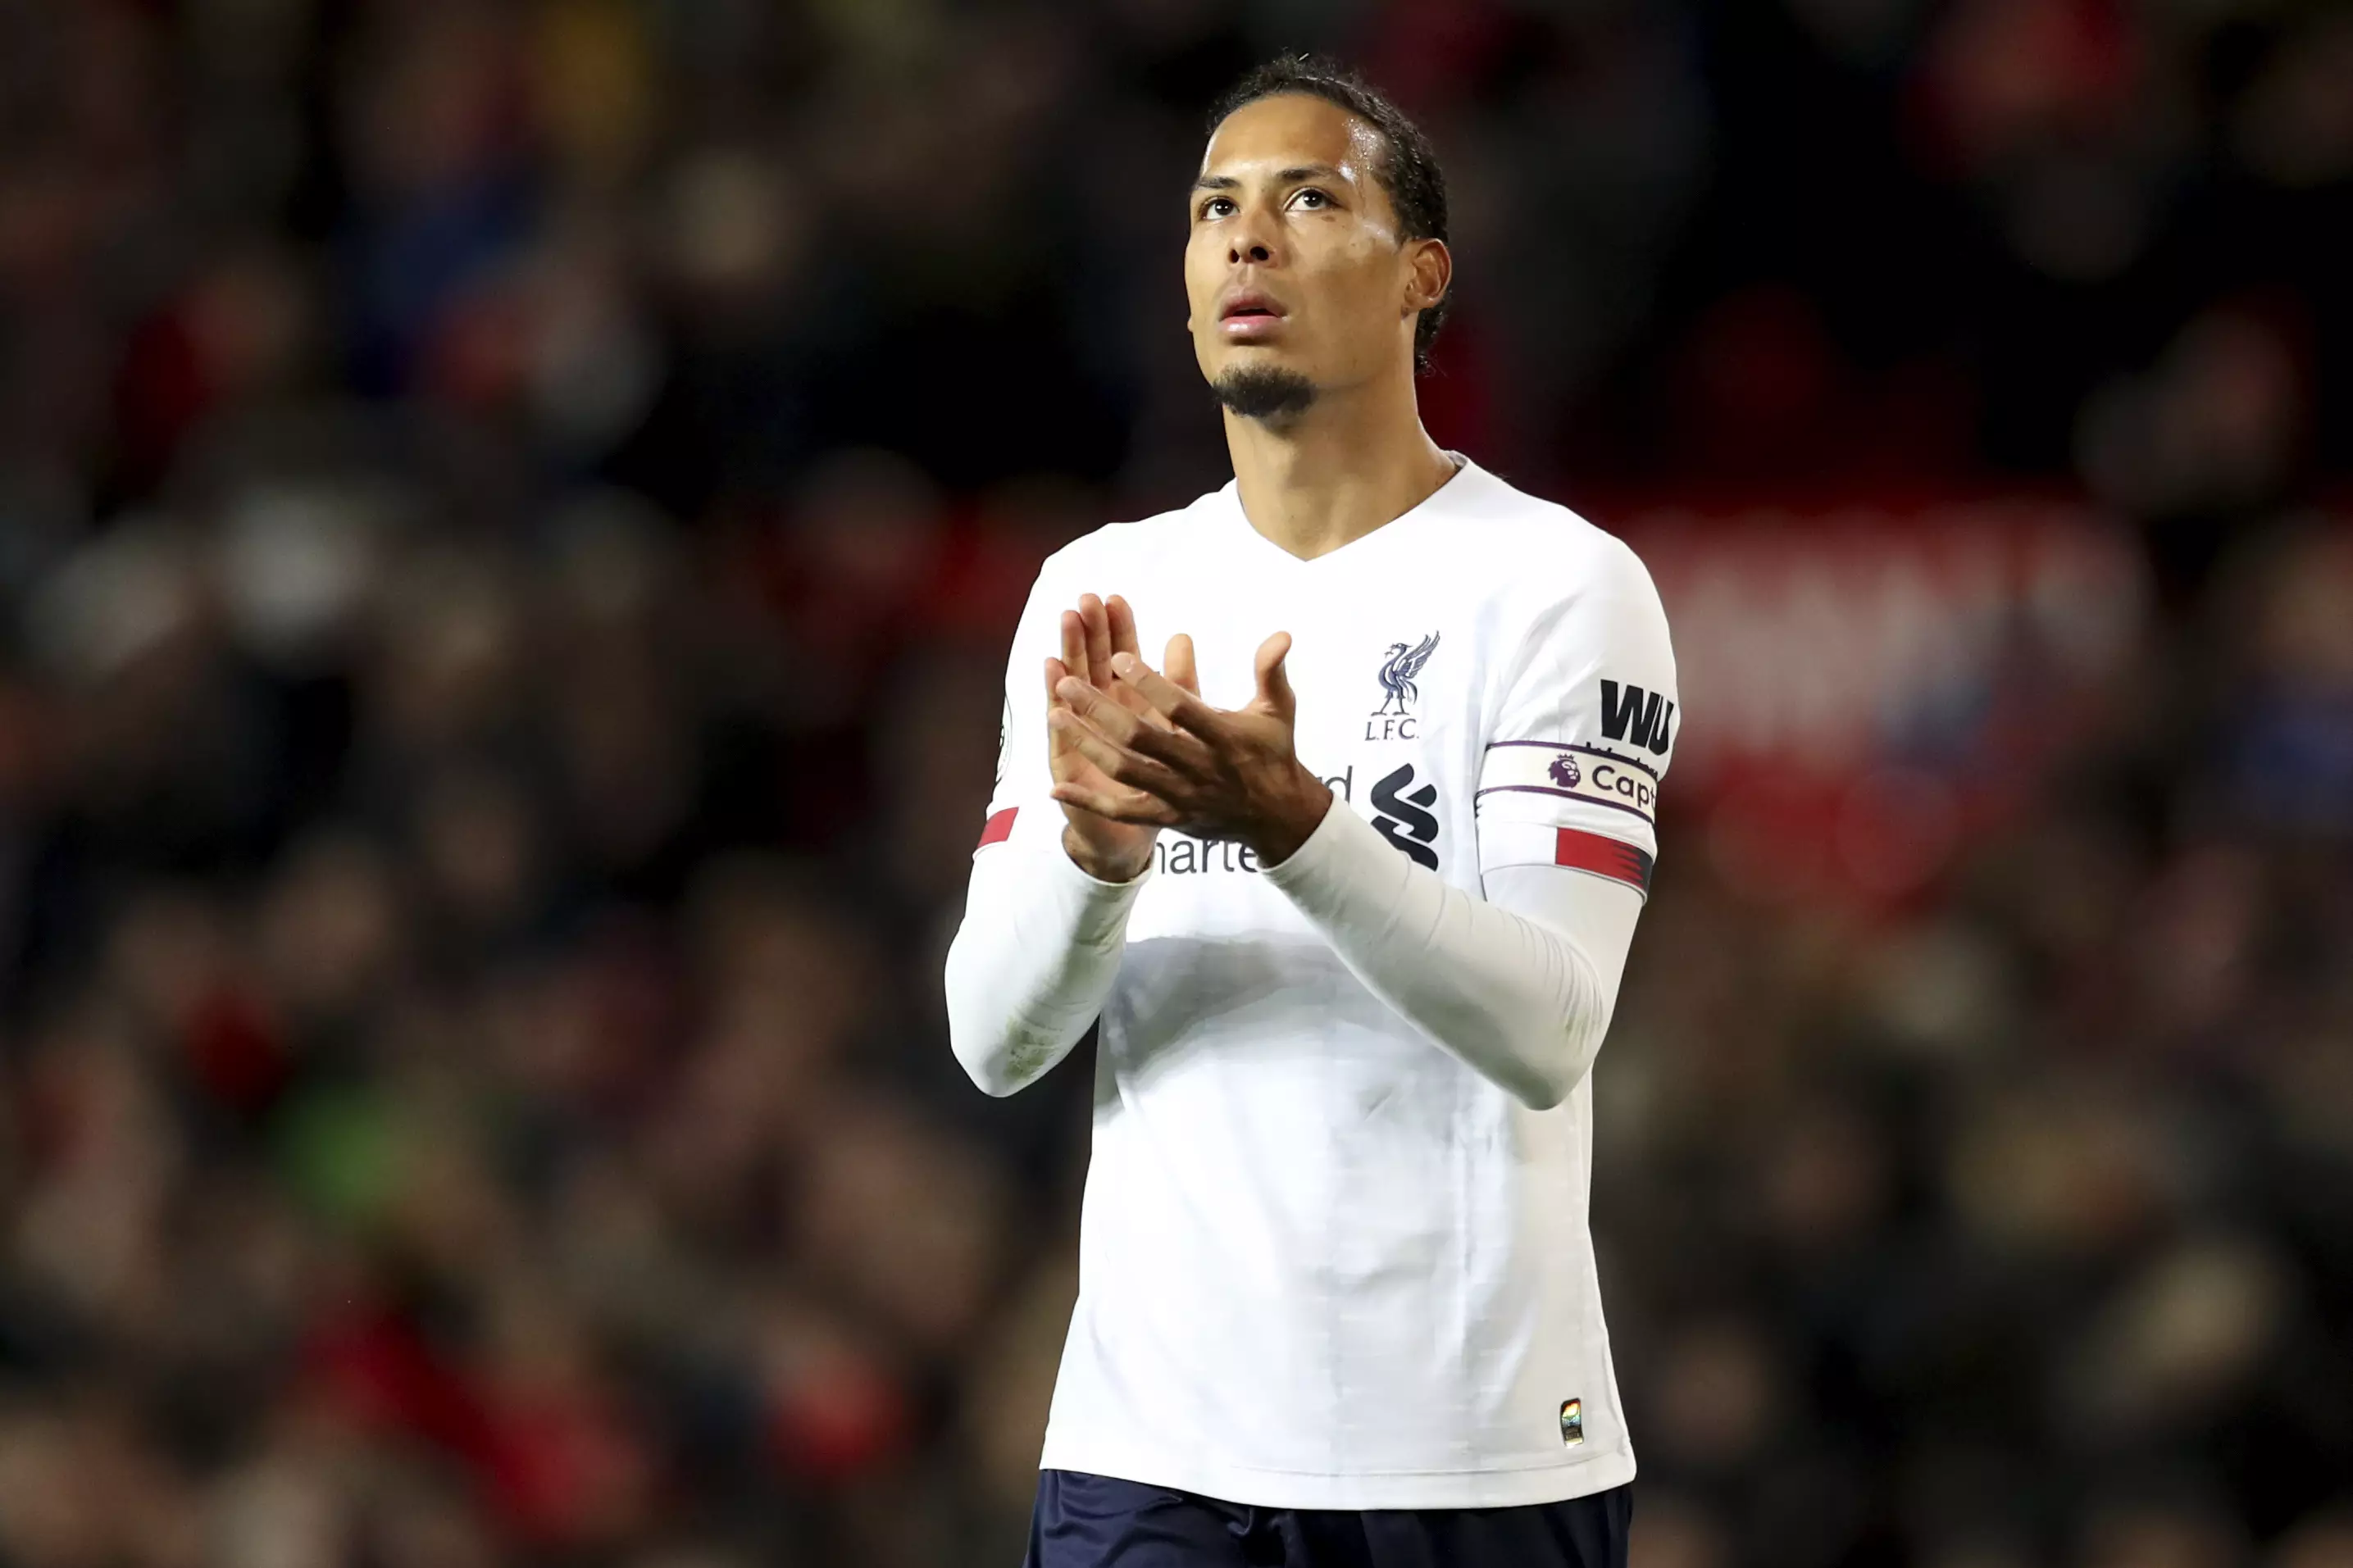 Virgil van Dijk is one of the world's most valuable defenders and is an integral part of Klopp's Liverpool. (Image